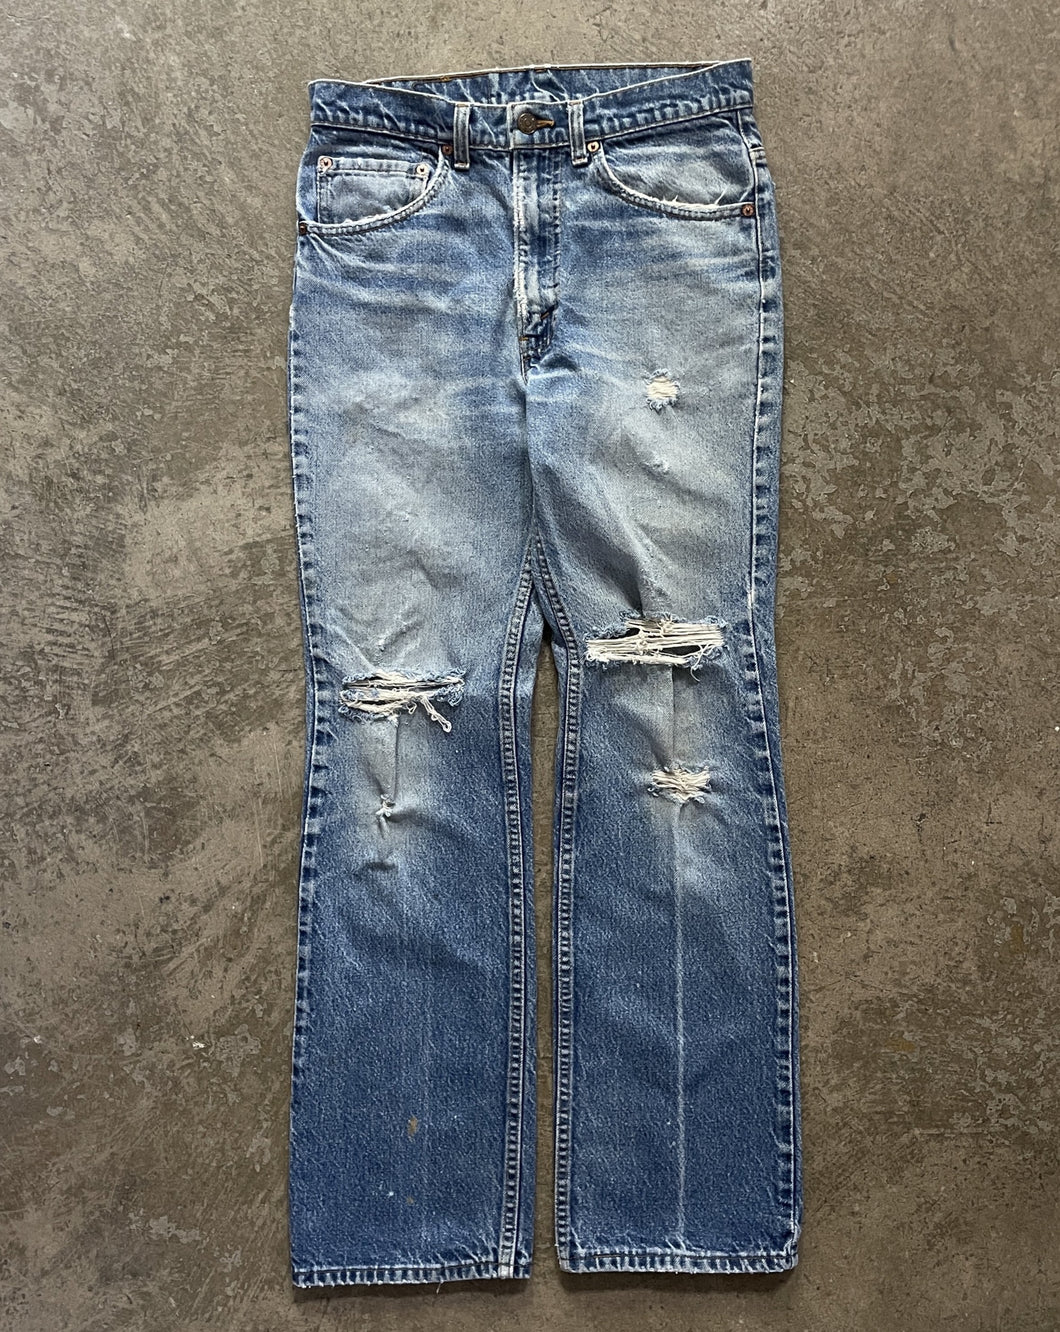 DISTRESSED & FADED BLUE 517 LEVI JEANS - 1980S